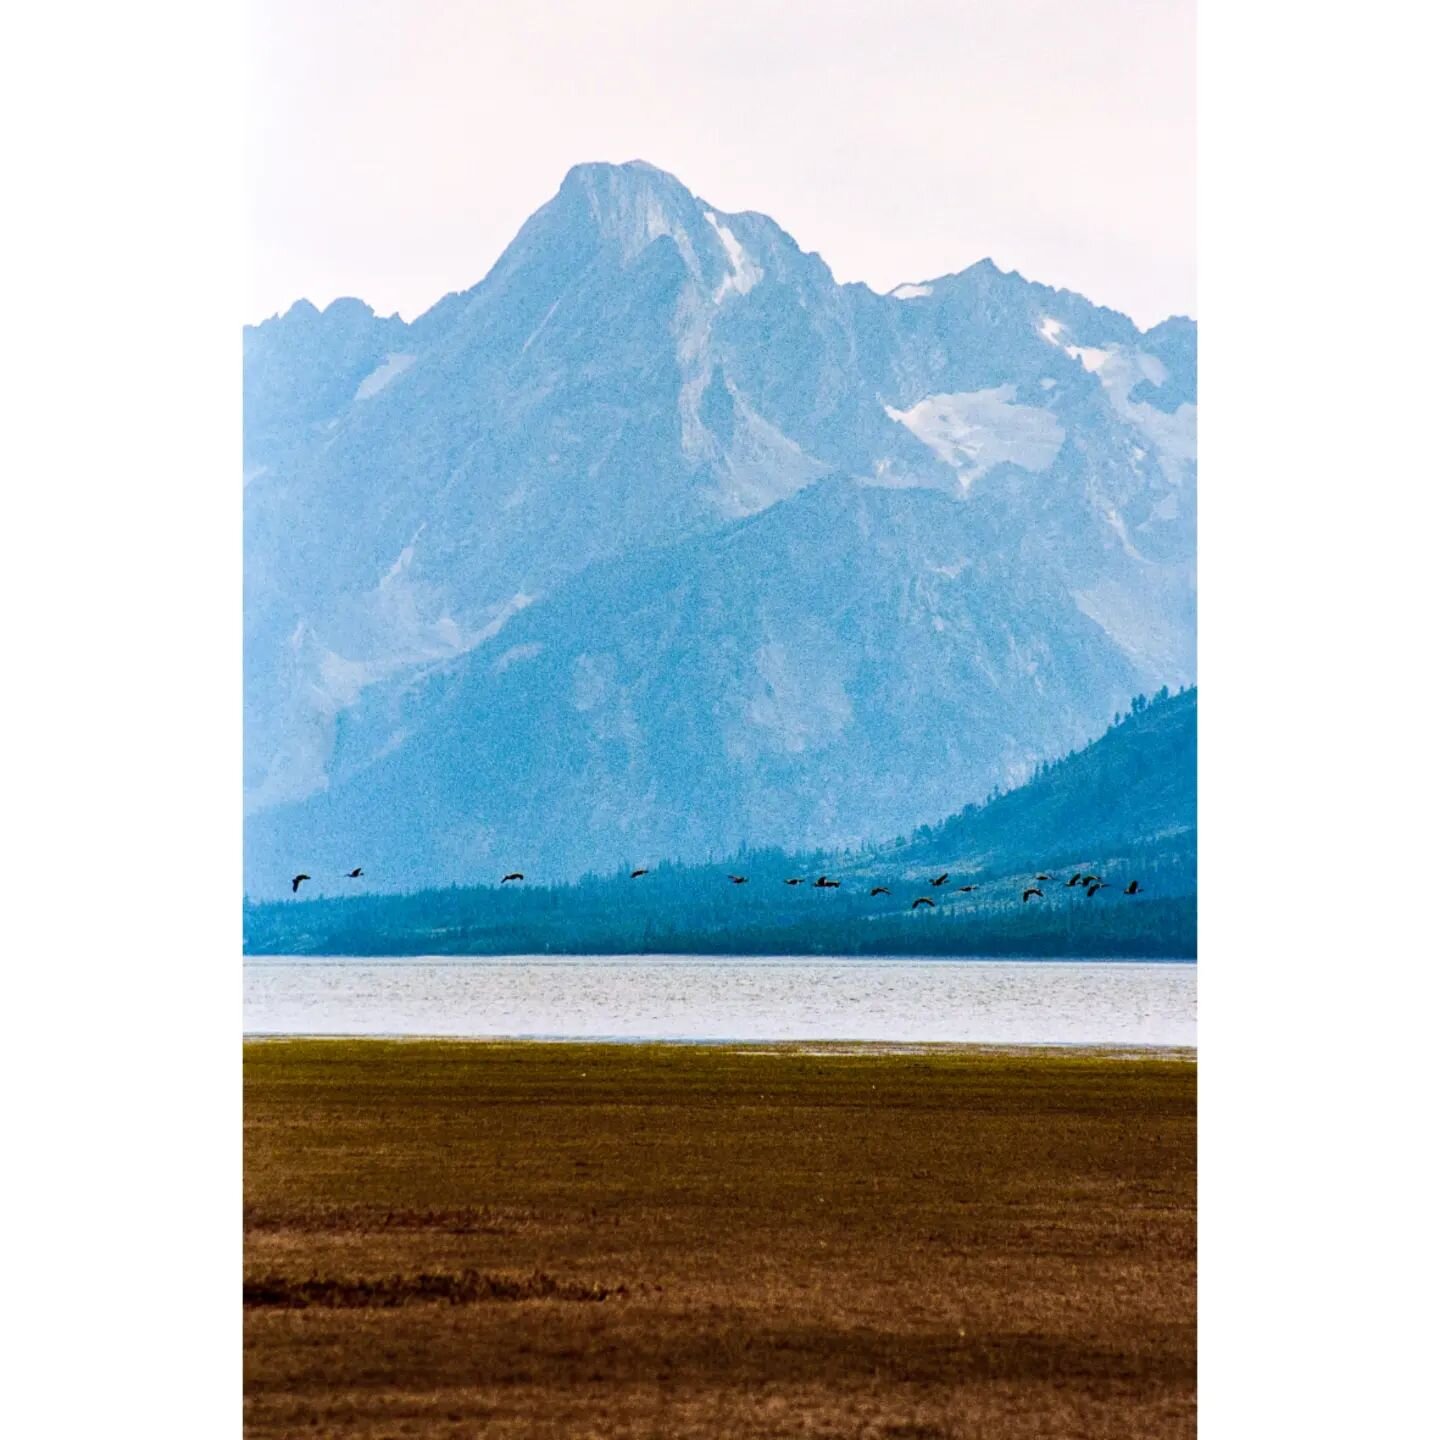 Birds and mountains. 

Went barefoot at a muddy bank during low water at Grand Teton. 

#35mm #35mmfilm #analog #analogfilm #film #filmphotography #kodak #grandtetonnationalpark #birds #mountains #nationalparkservice #nps #camping #hiking #canon